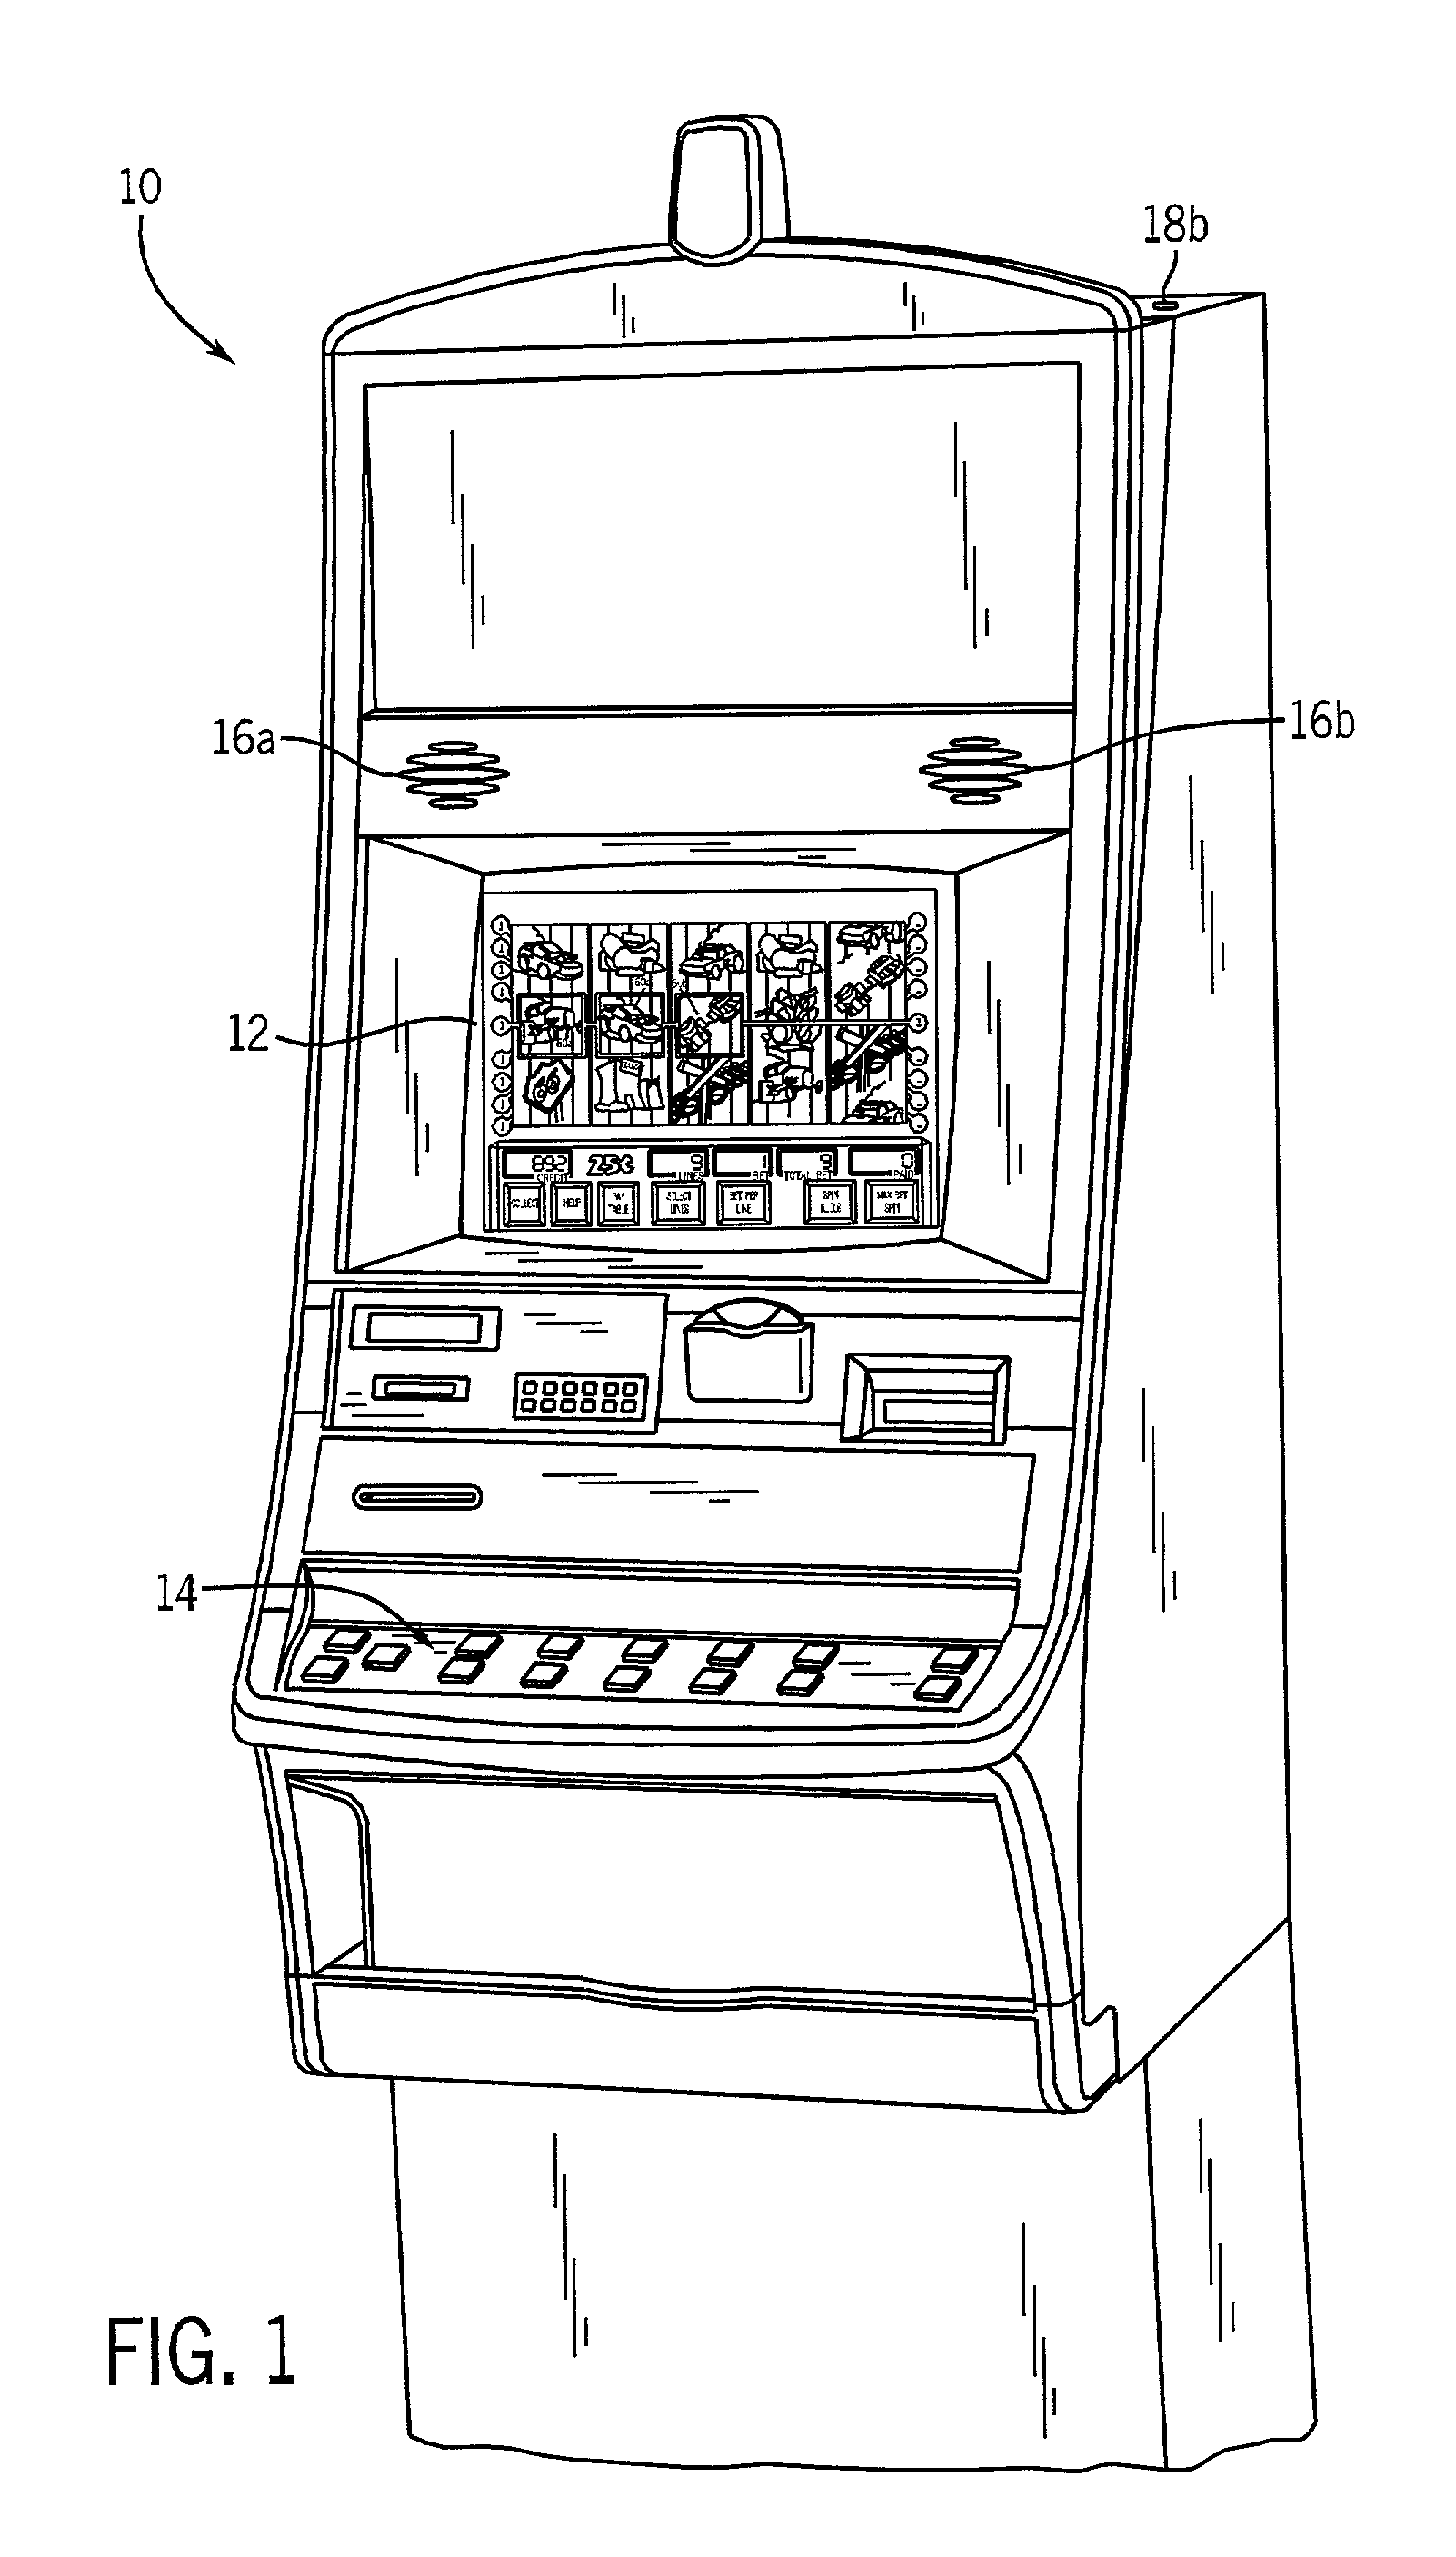 Gaming machine with ambient noise attenuation